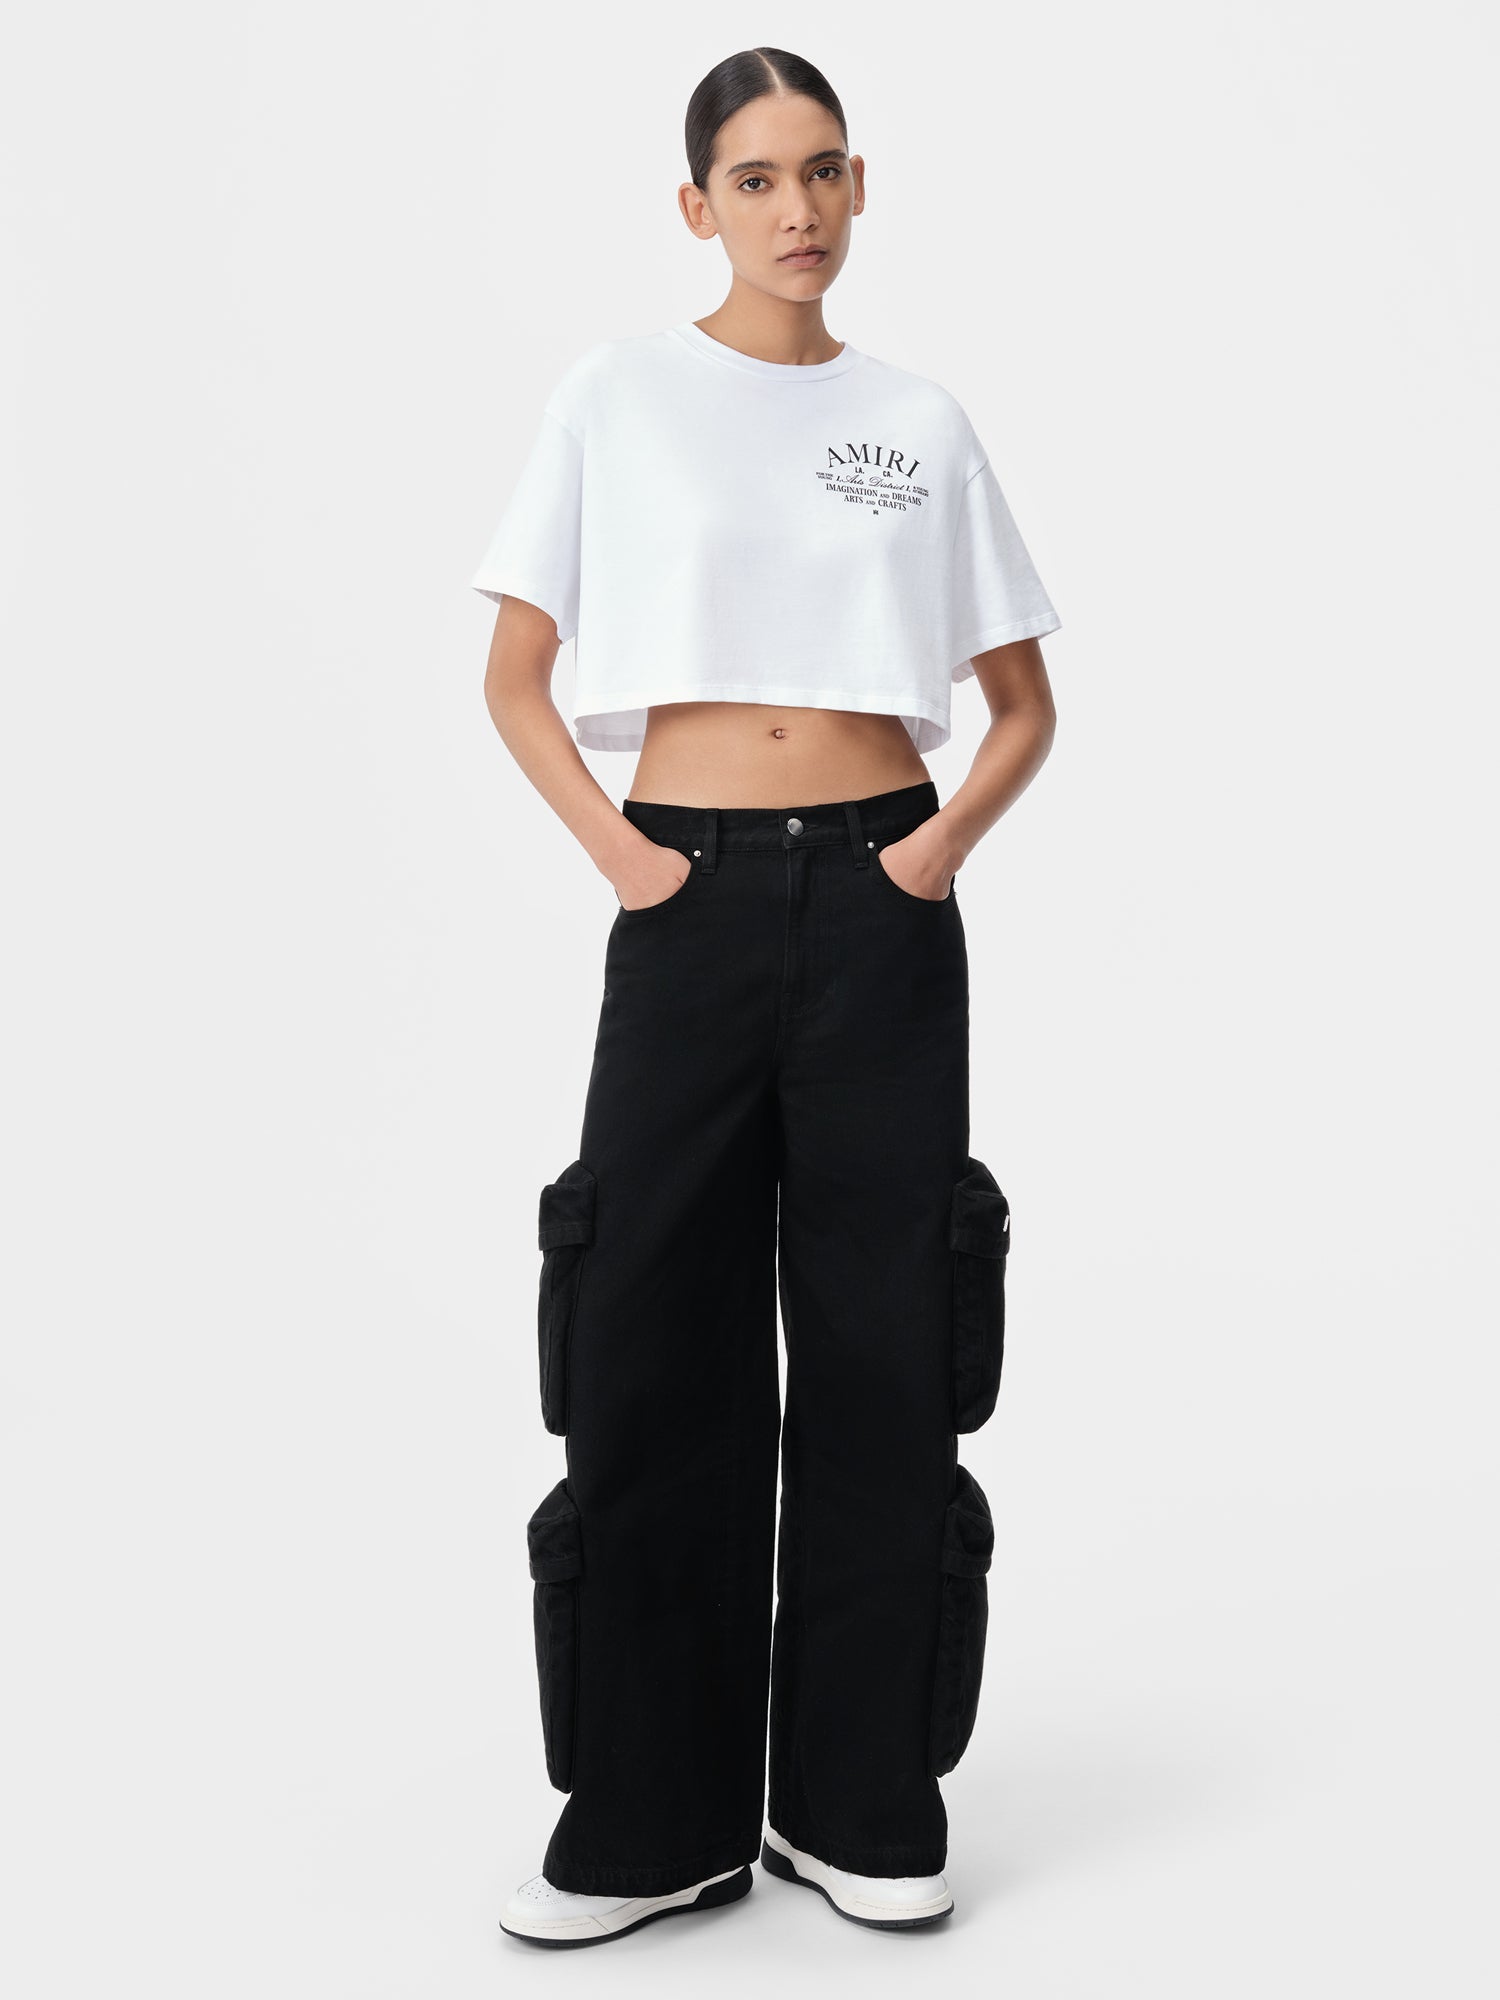 Product WOMEN - WOMEN'S ARTS DISTRICT CROPPED TEE - White featured image